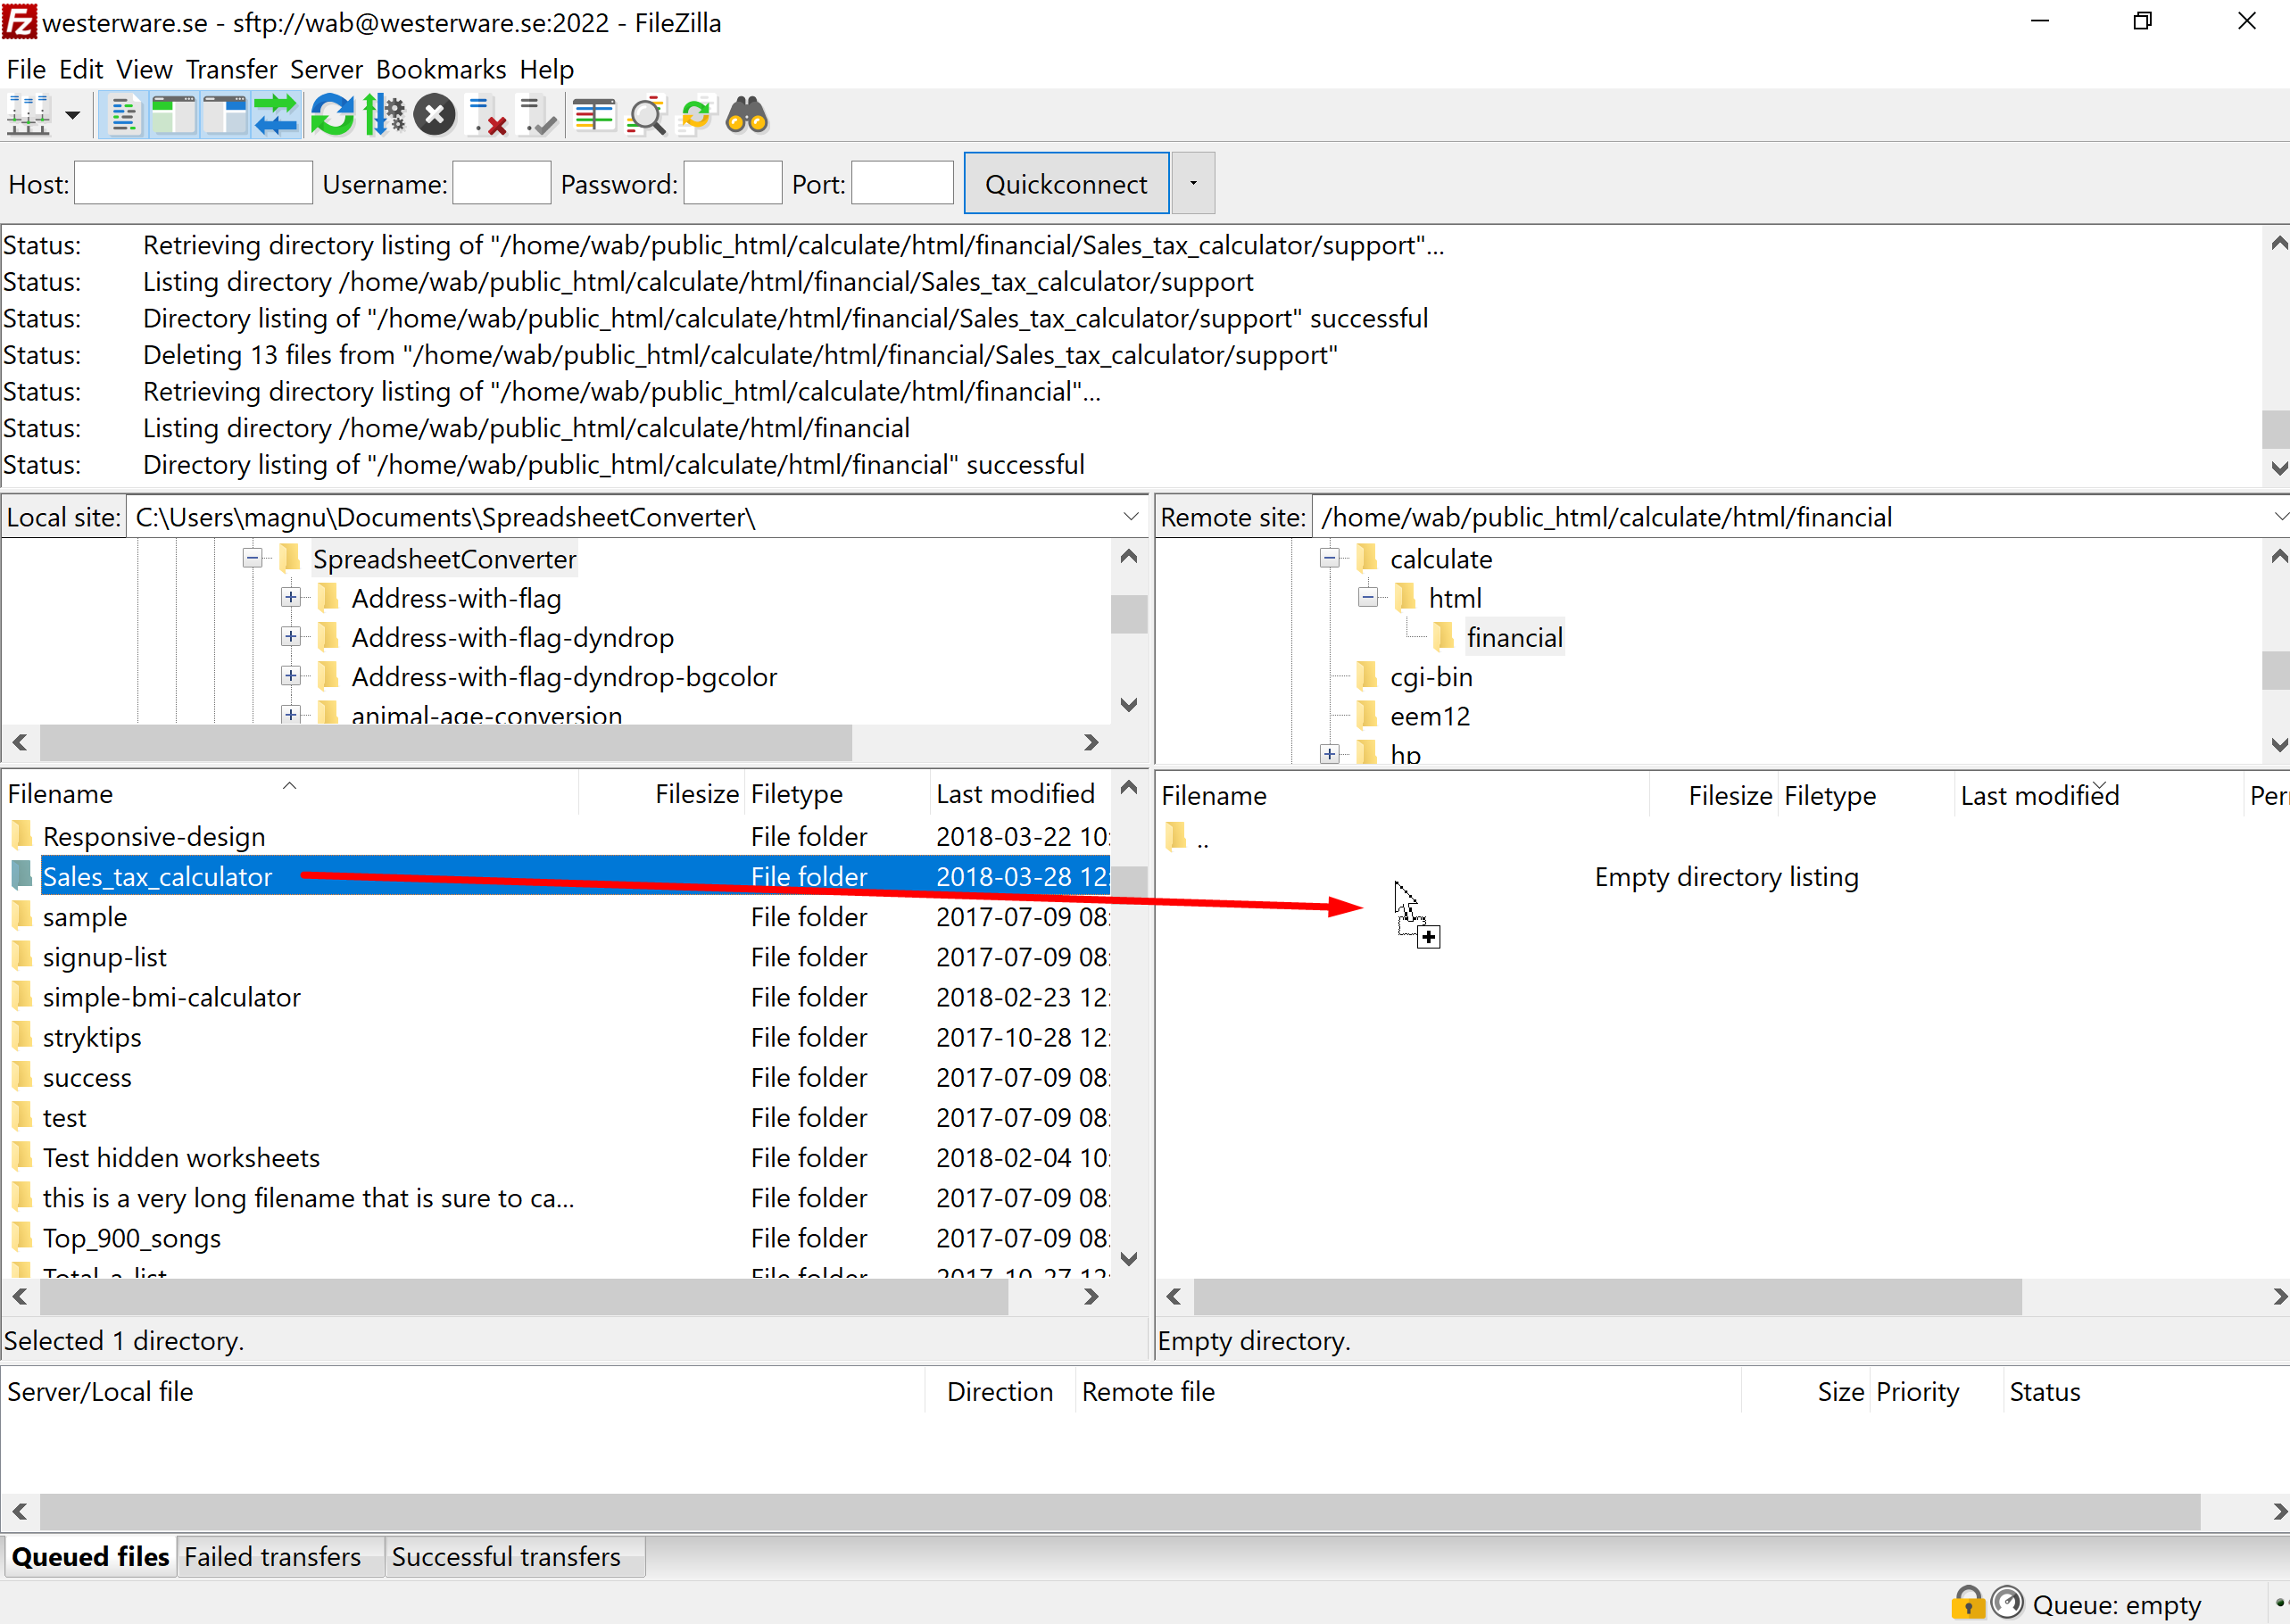 Screenshot of the folder being dragged from the Local to the Remote pane in FileZilla